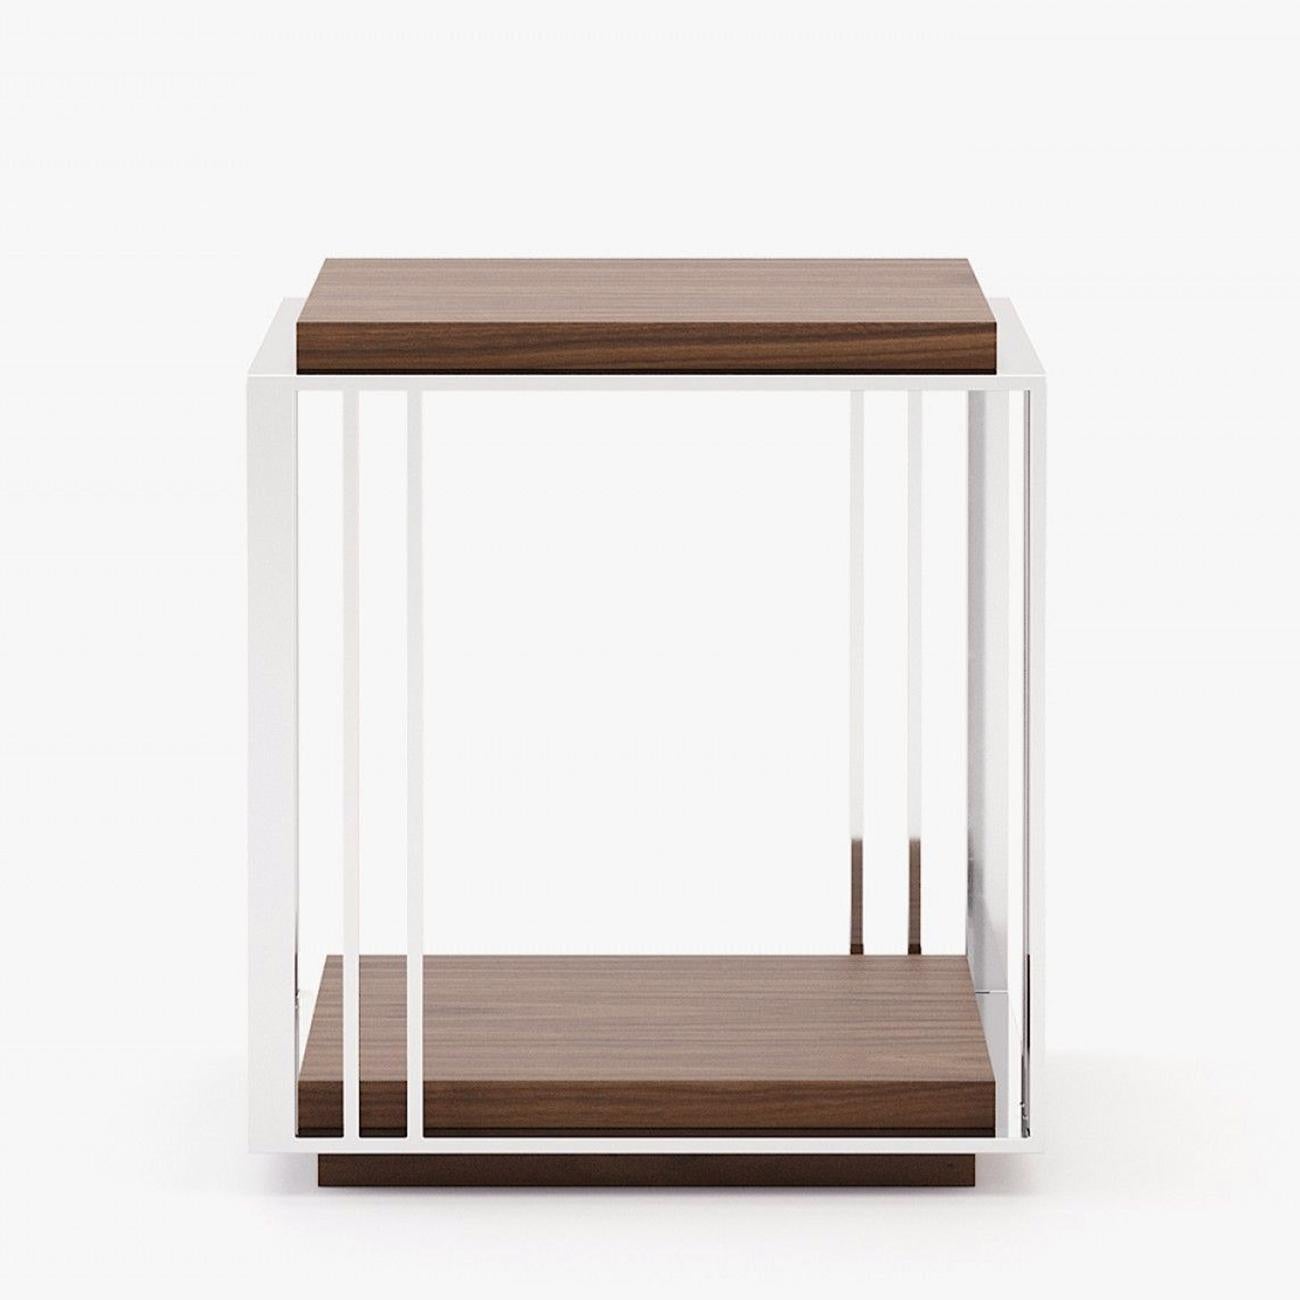 Side table Houston walnut with polished stainless steel structure
and with upper top and bottom top in wood in walnut matte finish.
Also available on request in grey oak matte, or in natural oak, or in
ebony matte finish. Also available with others